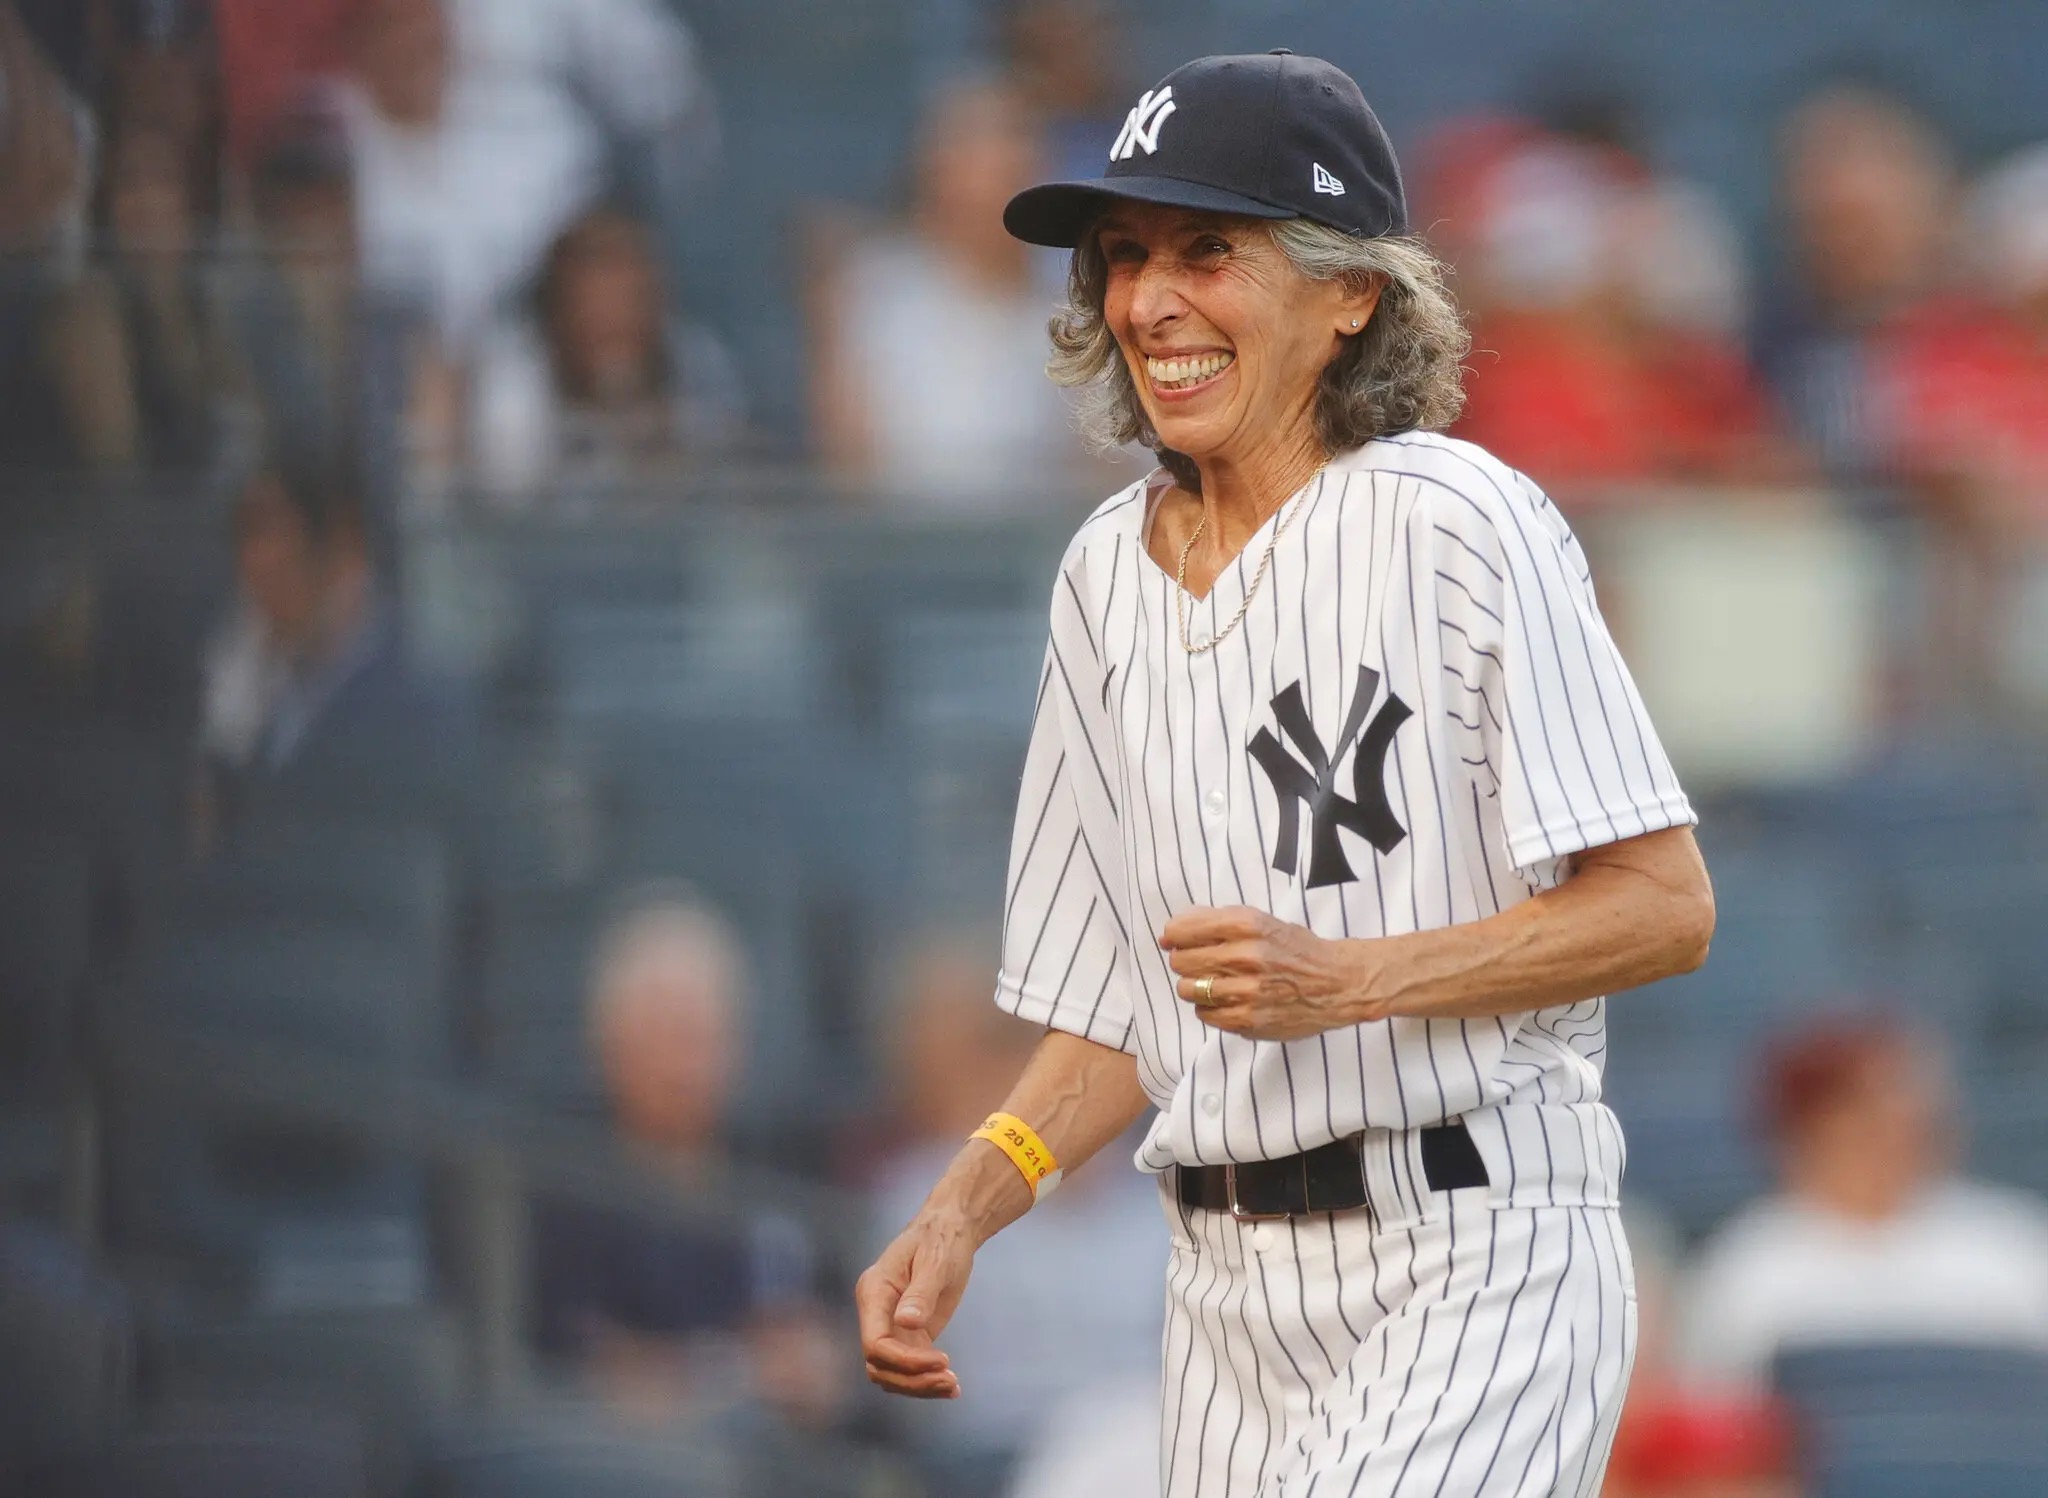 #1 Gwen Goldman | 70-Year Old Woman Finally Becomes Yankee Bat Girl After Being Rejected in 1961 | Zestradar